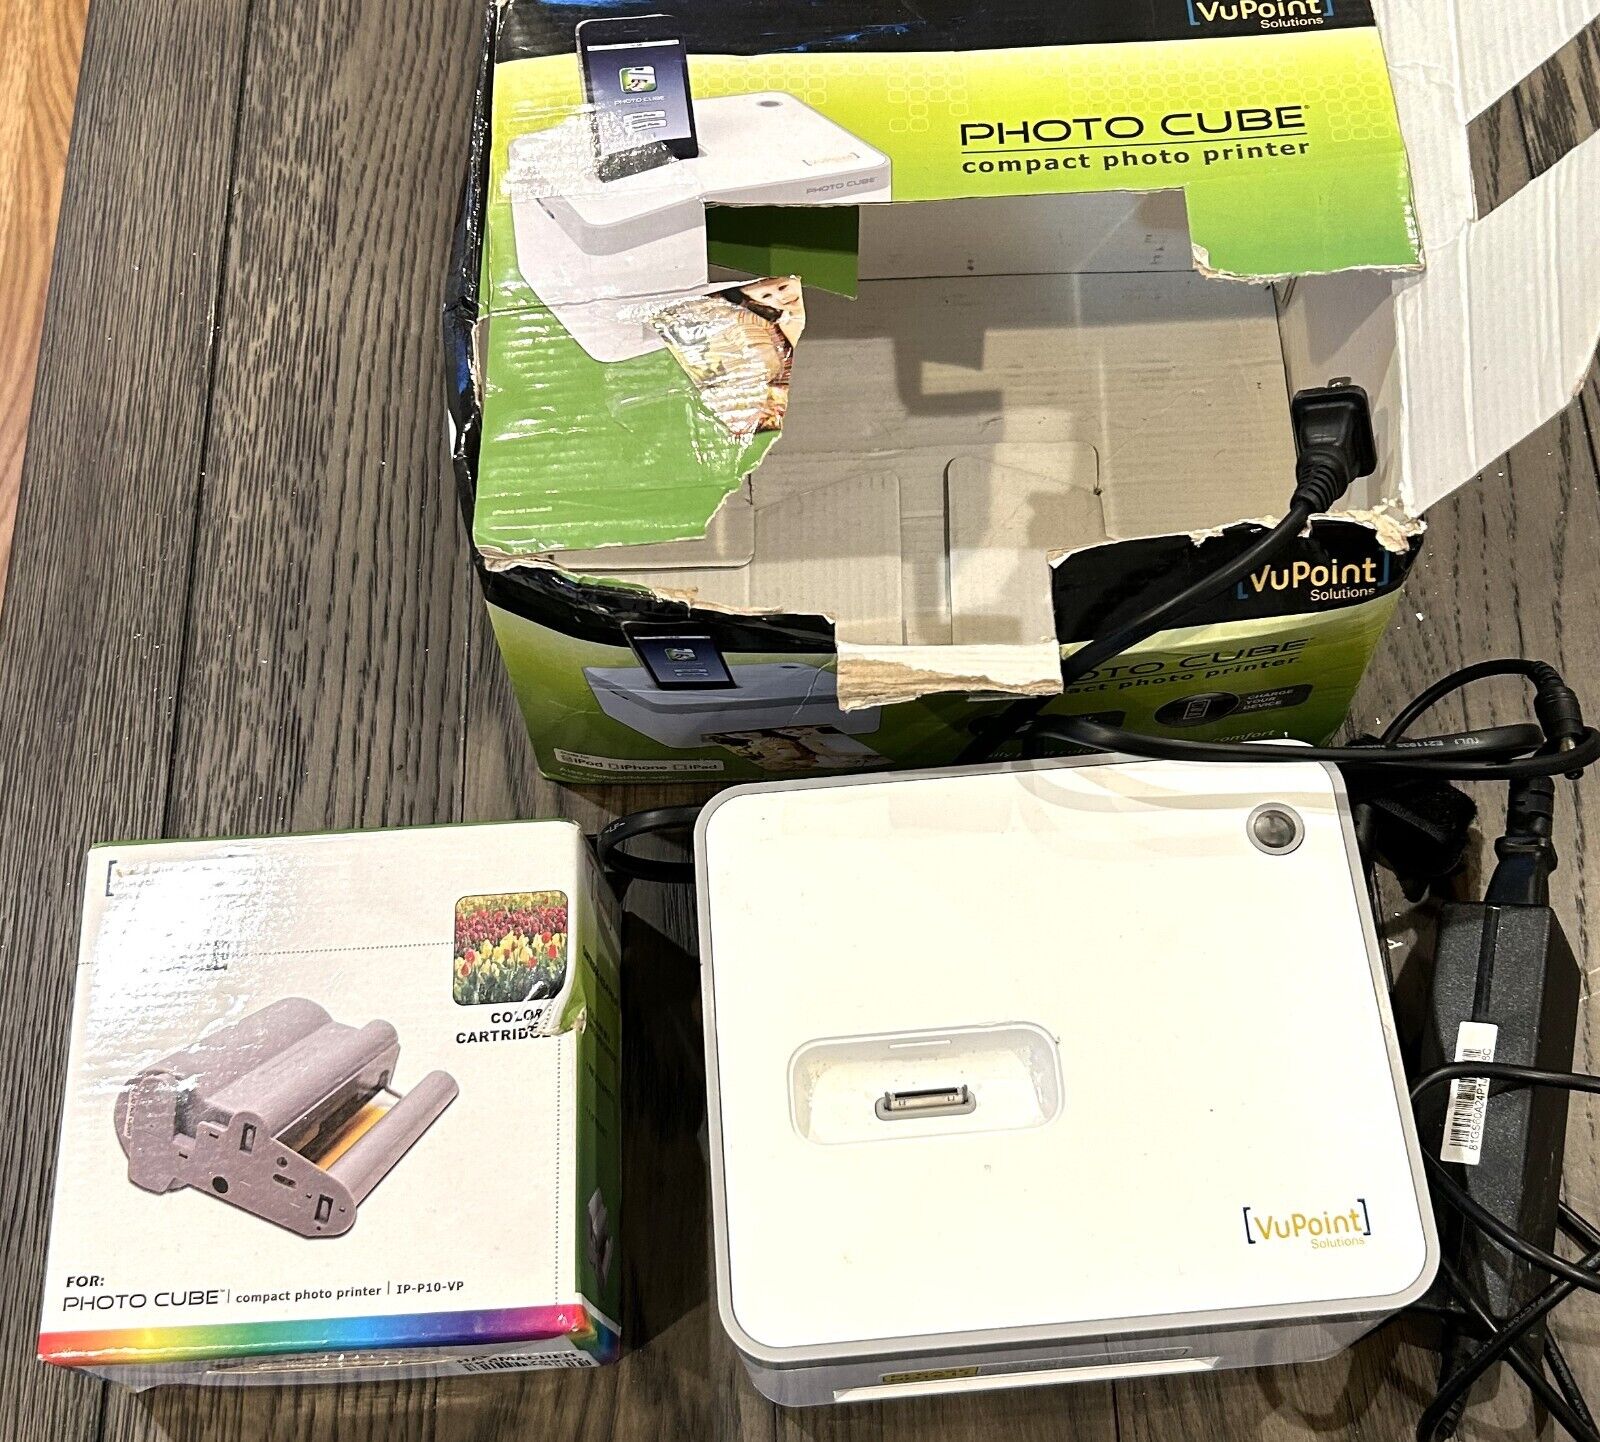 Vupoint Solutions Photo Cube Compact Photo Printer IP-P20-VP & Color Cartridge